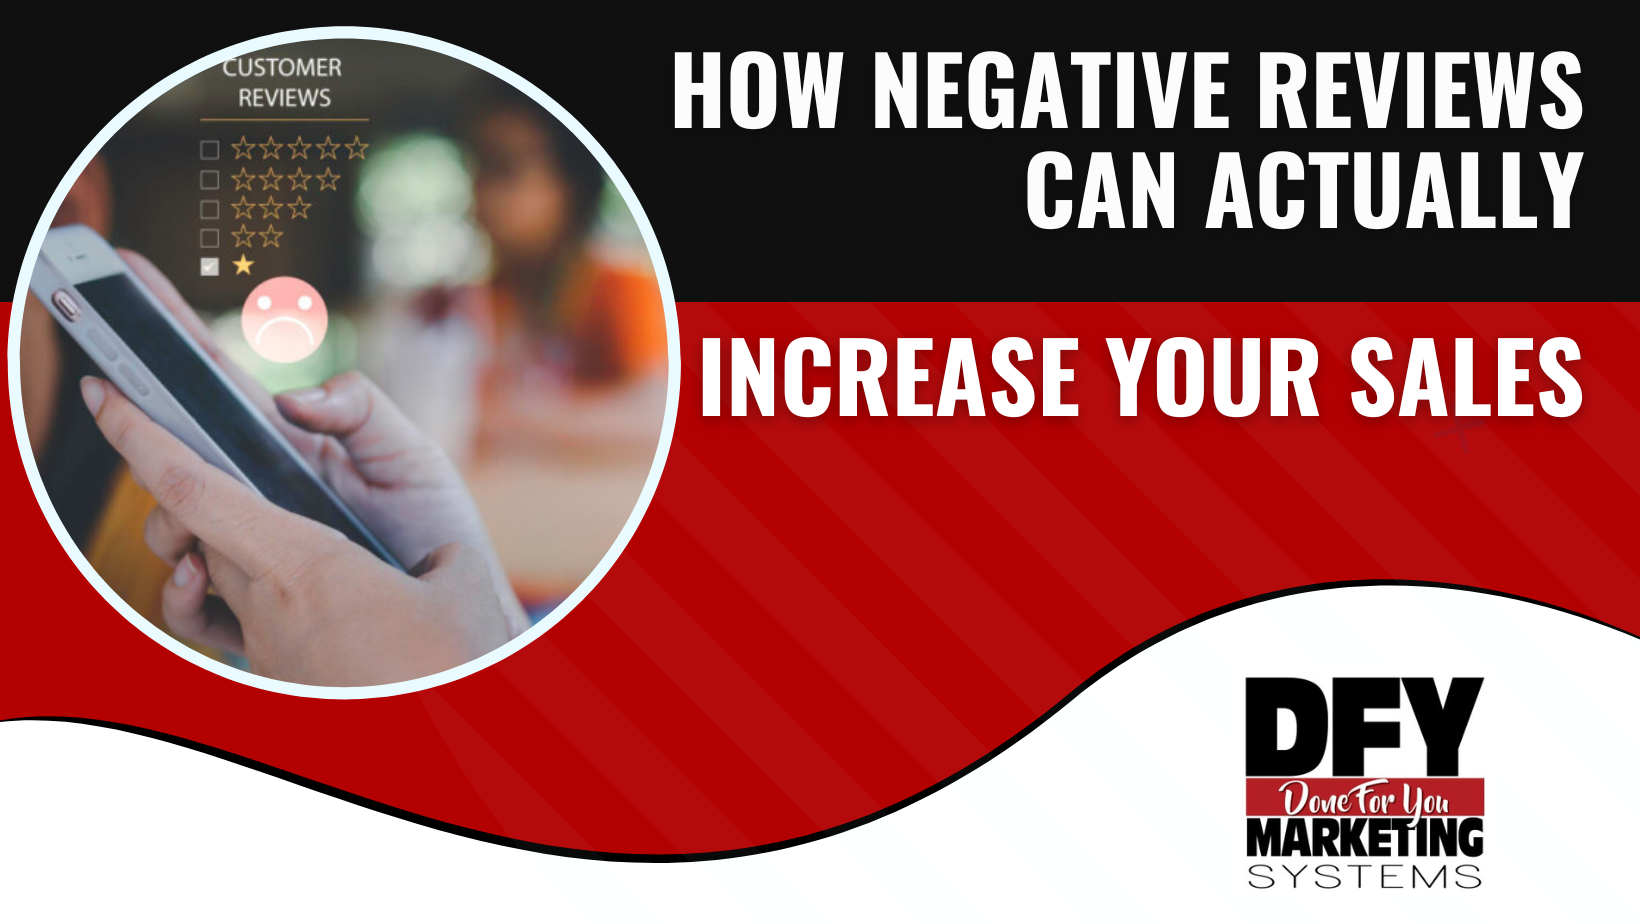 How Negative Reviews Can Actually Increase Your Sales